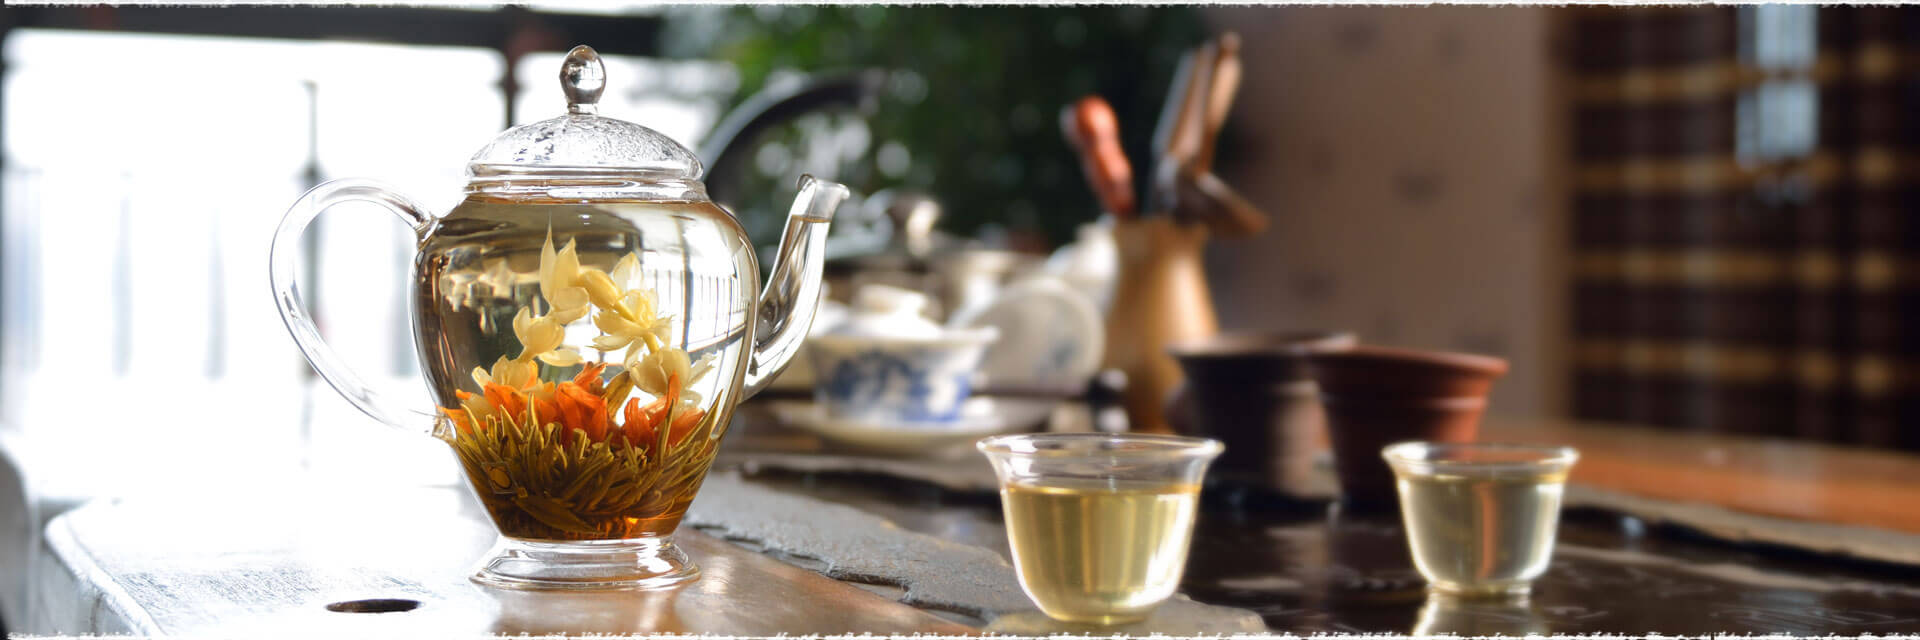 Flower Teas Have Many Effects to Gain the Benefits of Them